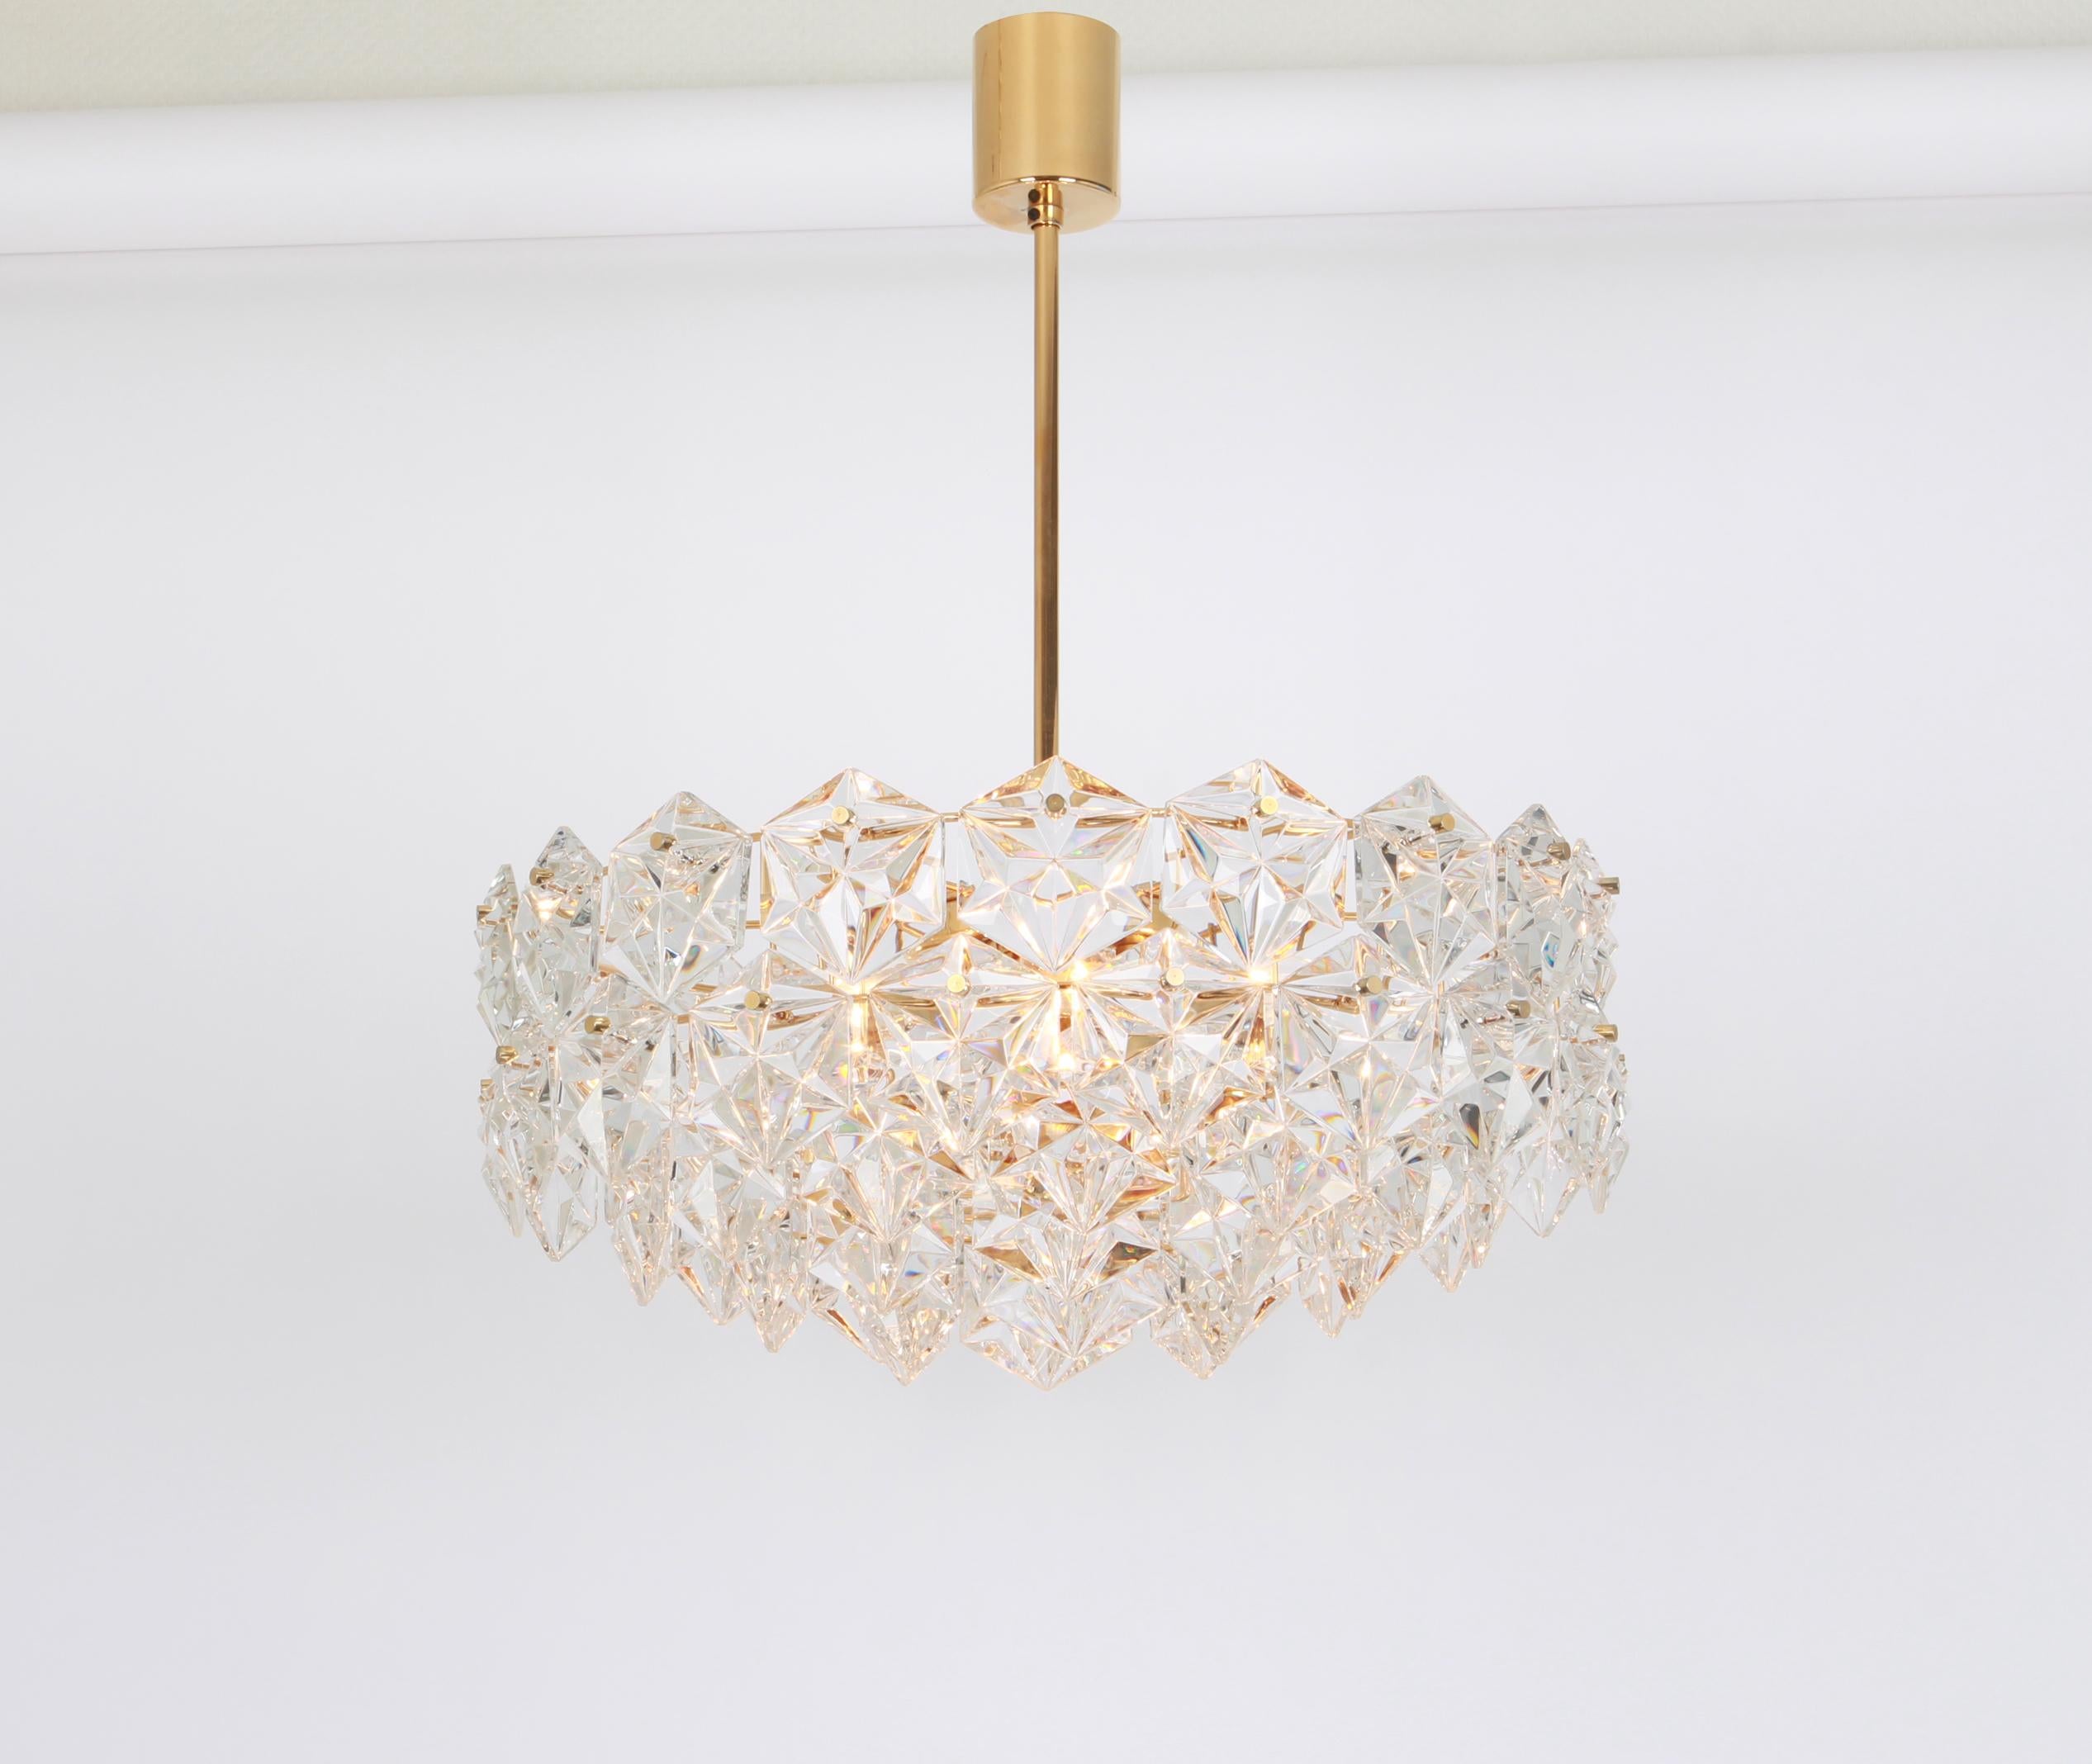 1 of 2 Kinkeldey Chandelier Gilt Brass and Crystal Glass, Germany, 1970s In Good Condition For Sale In Aachen, NRW